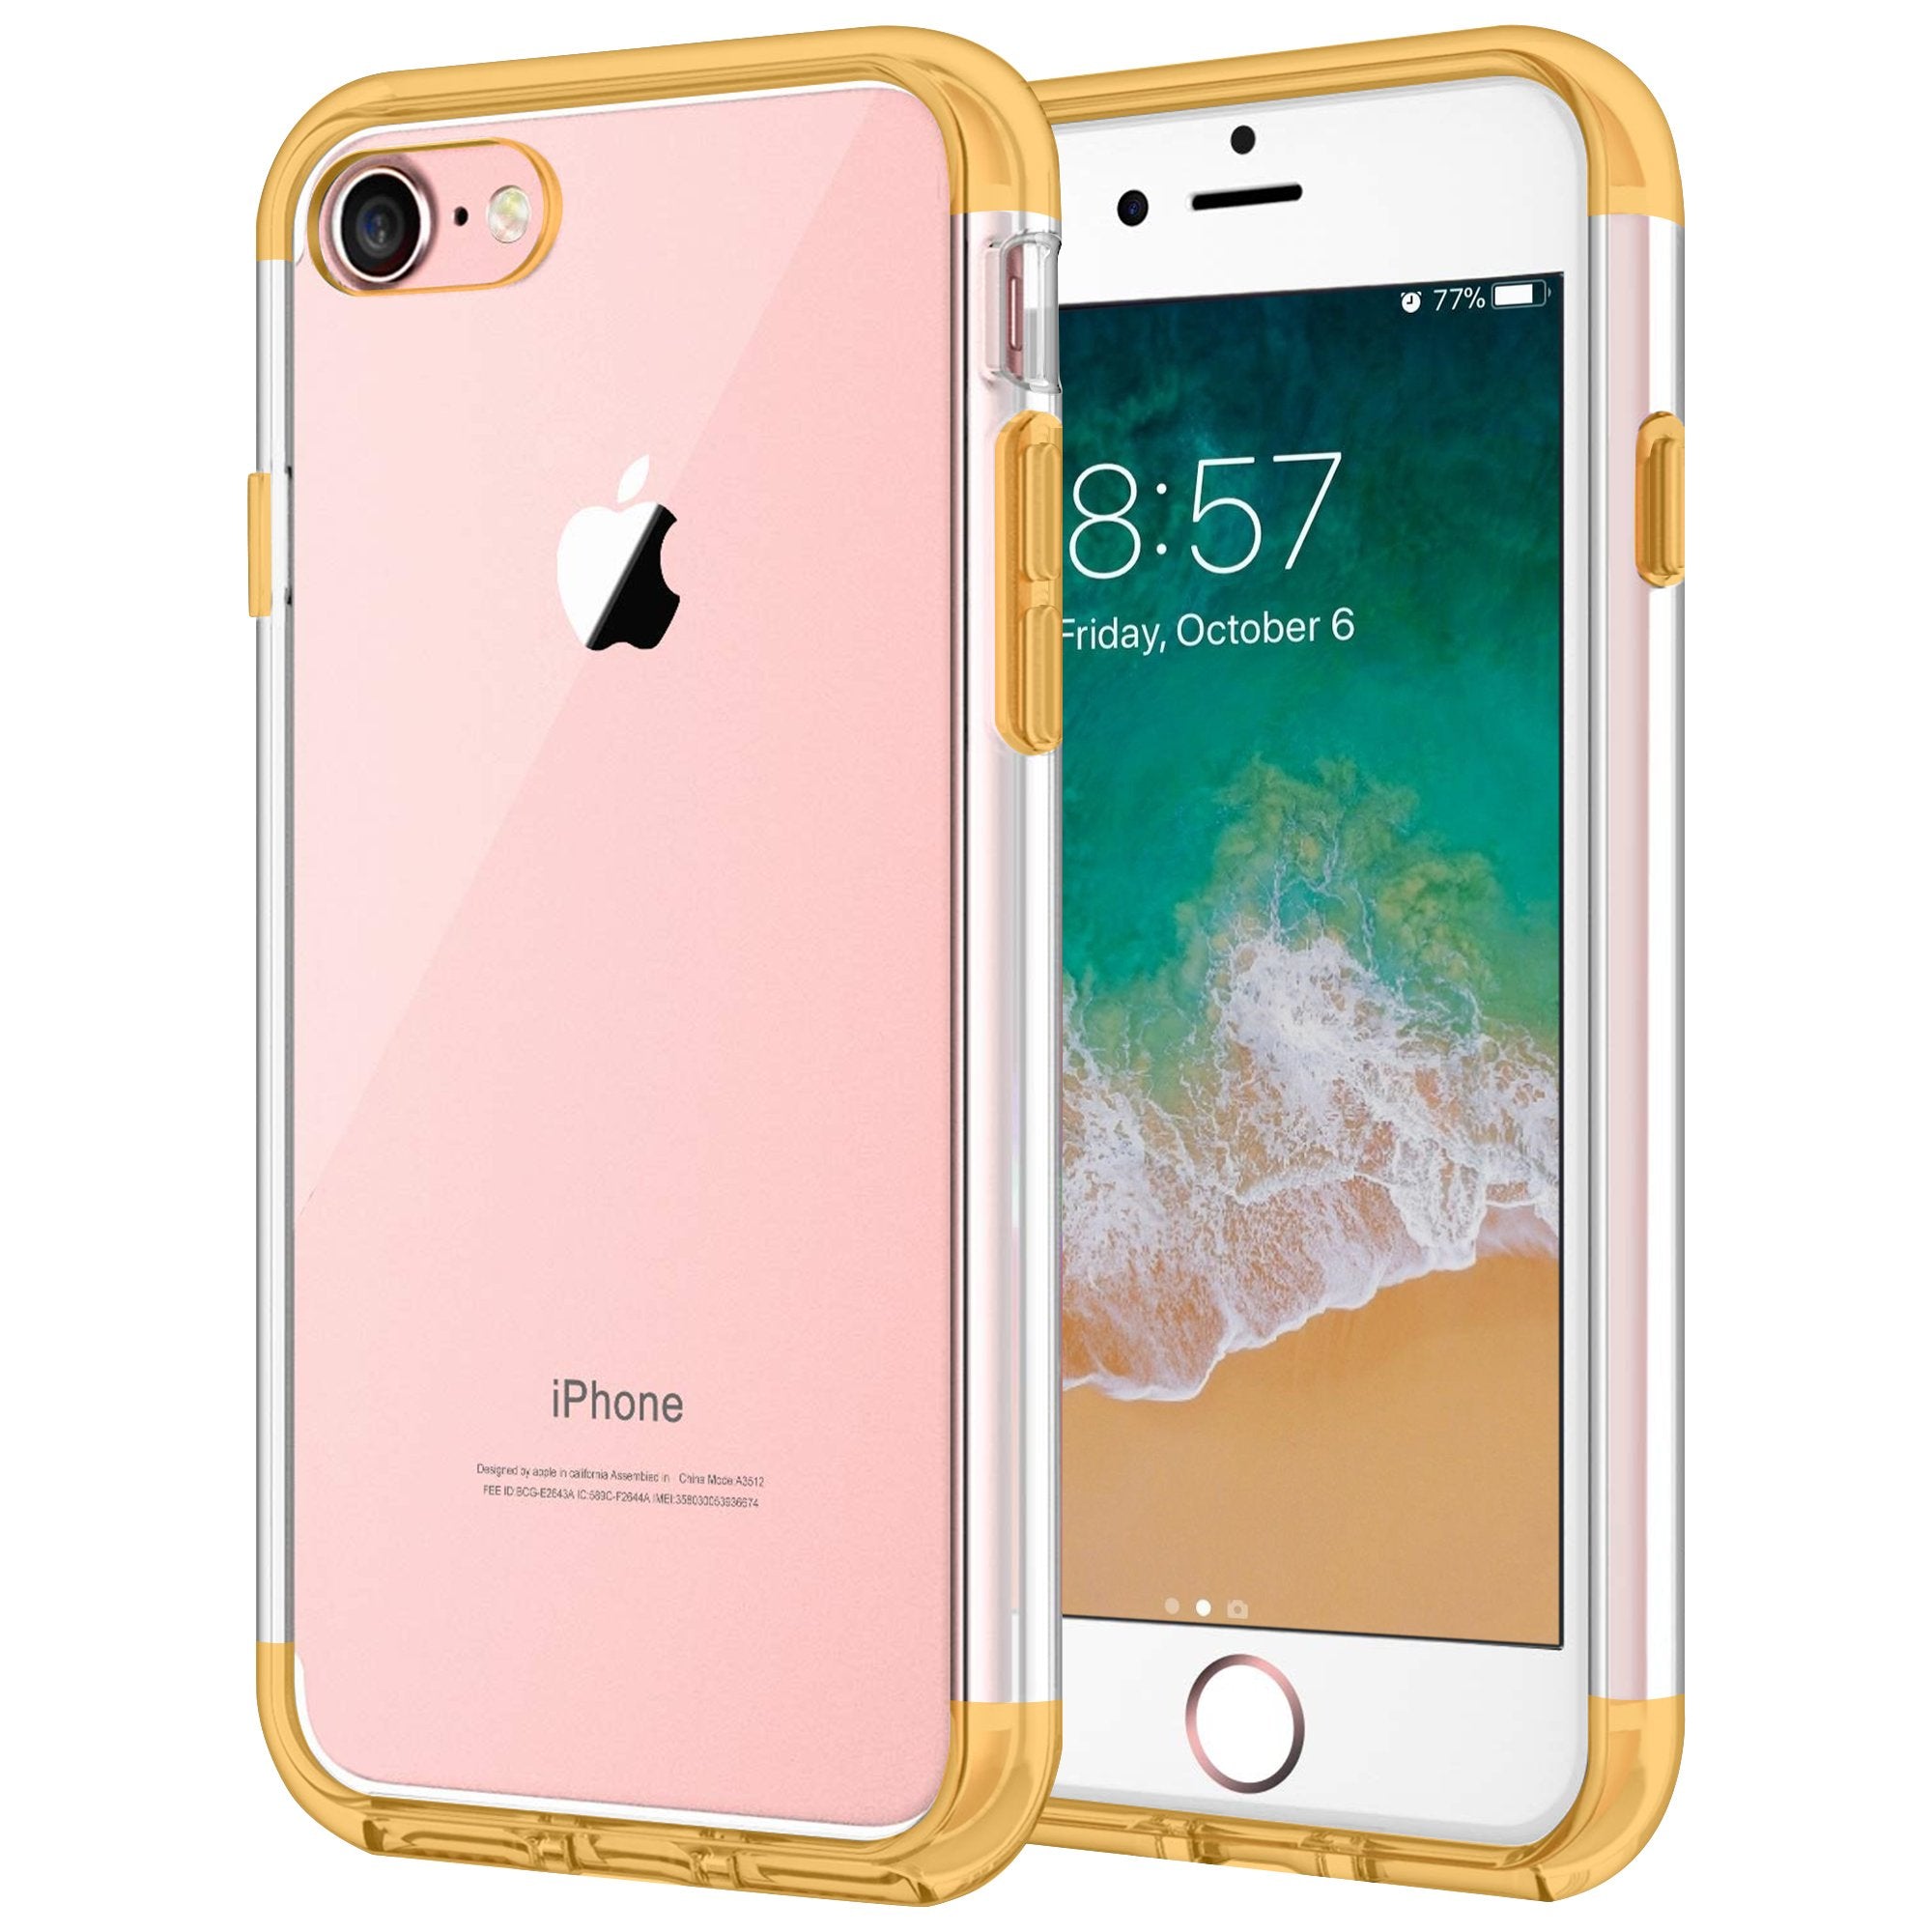 Case for iPhone 7 Shock Proof Soft TPU Silicone Phone Clear Slim Cover